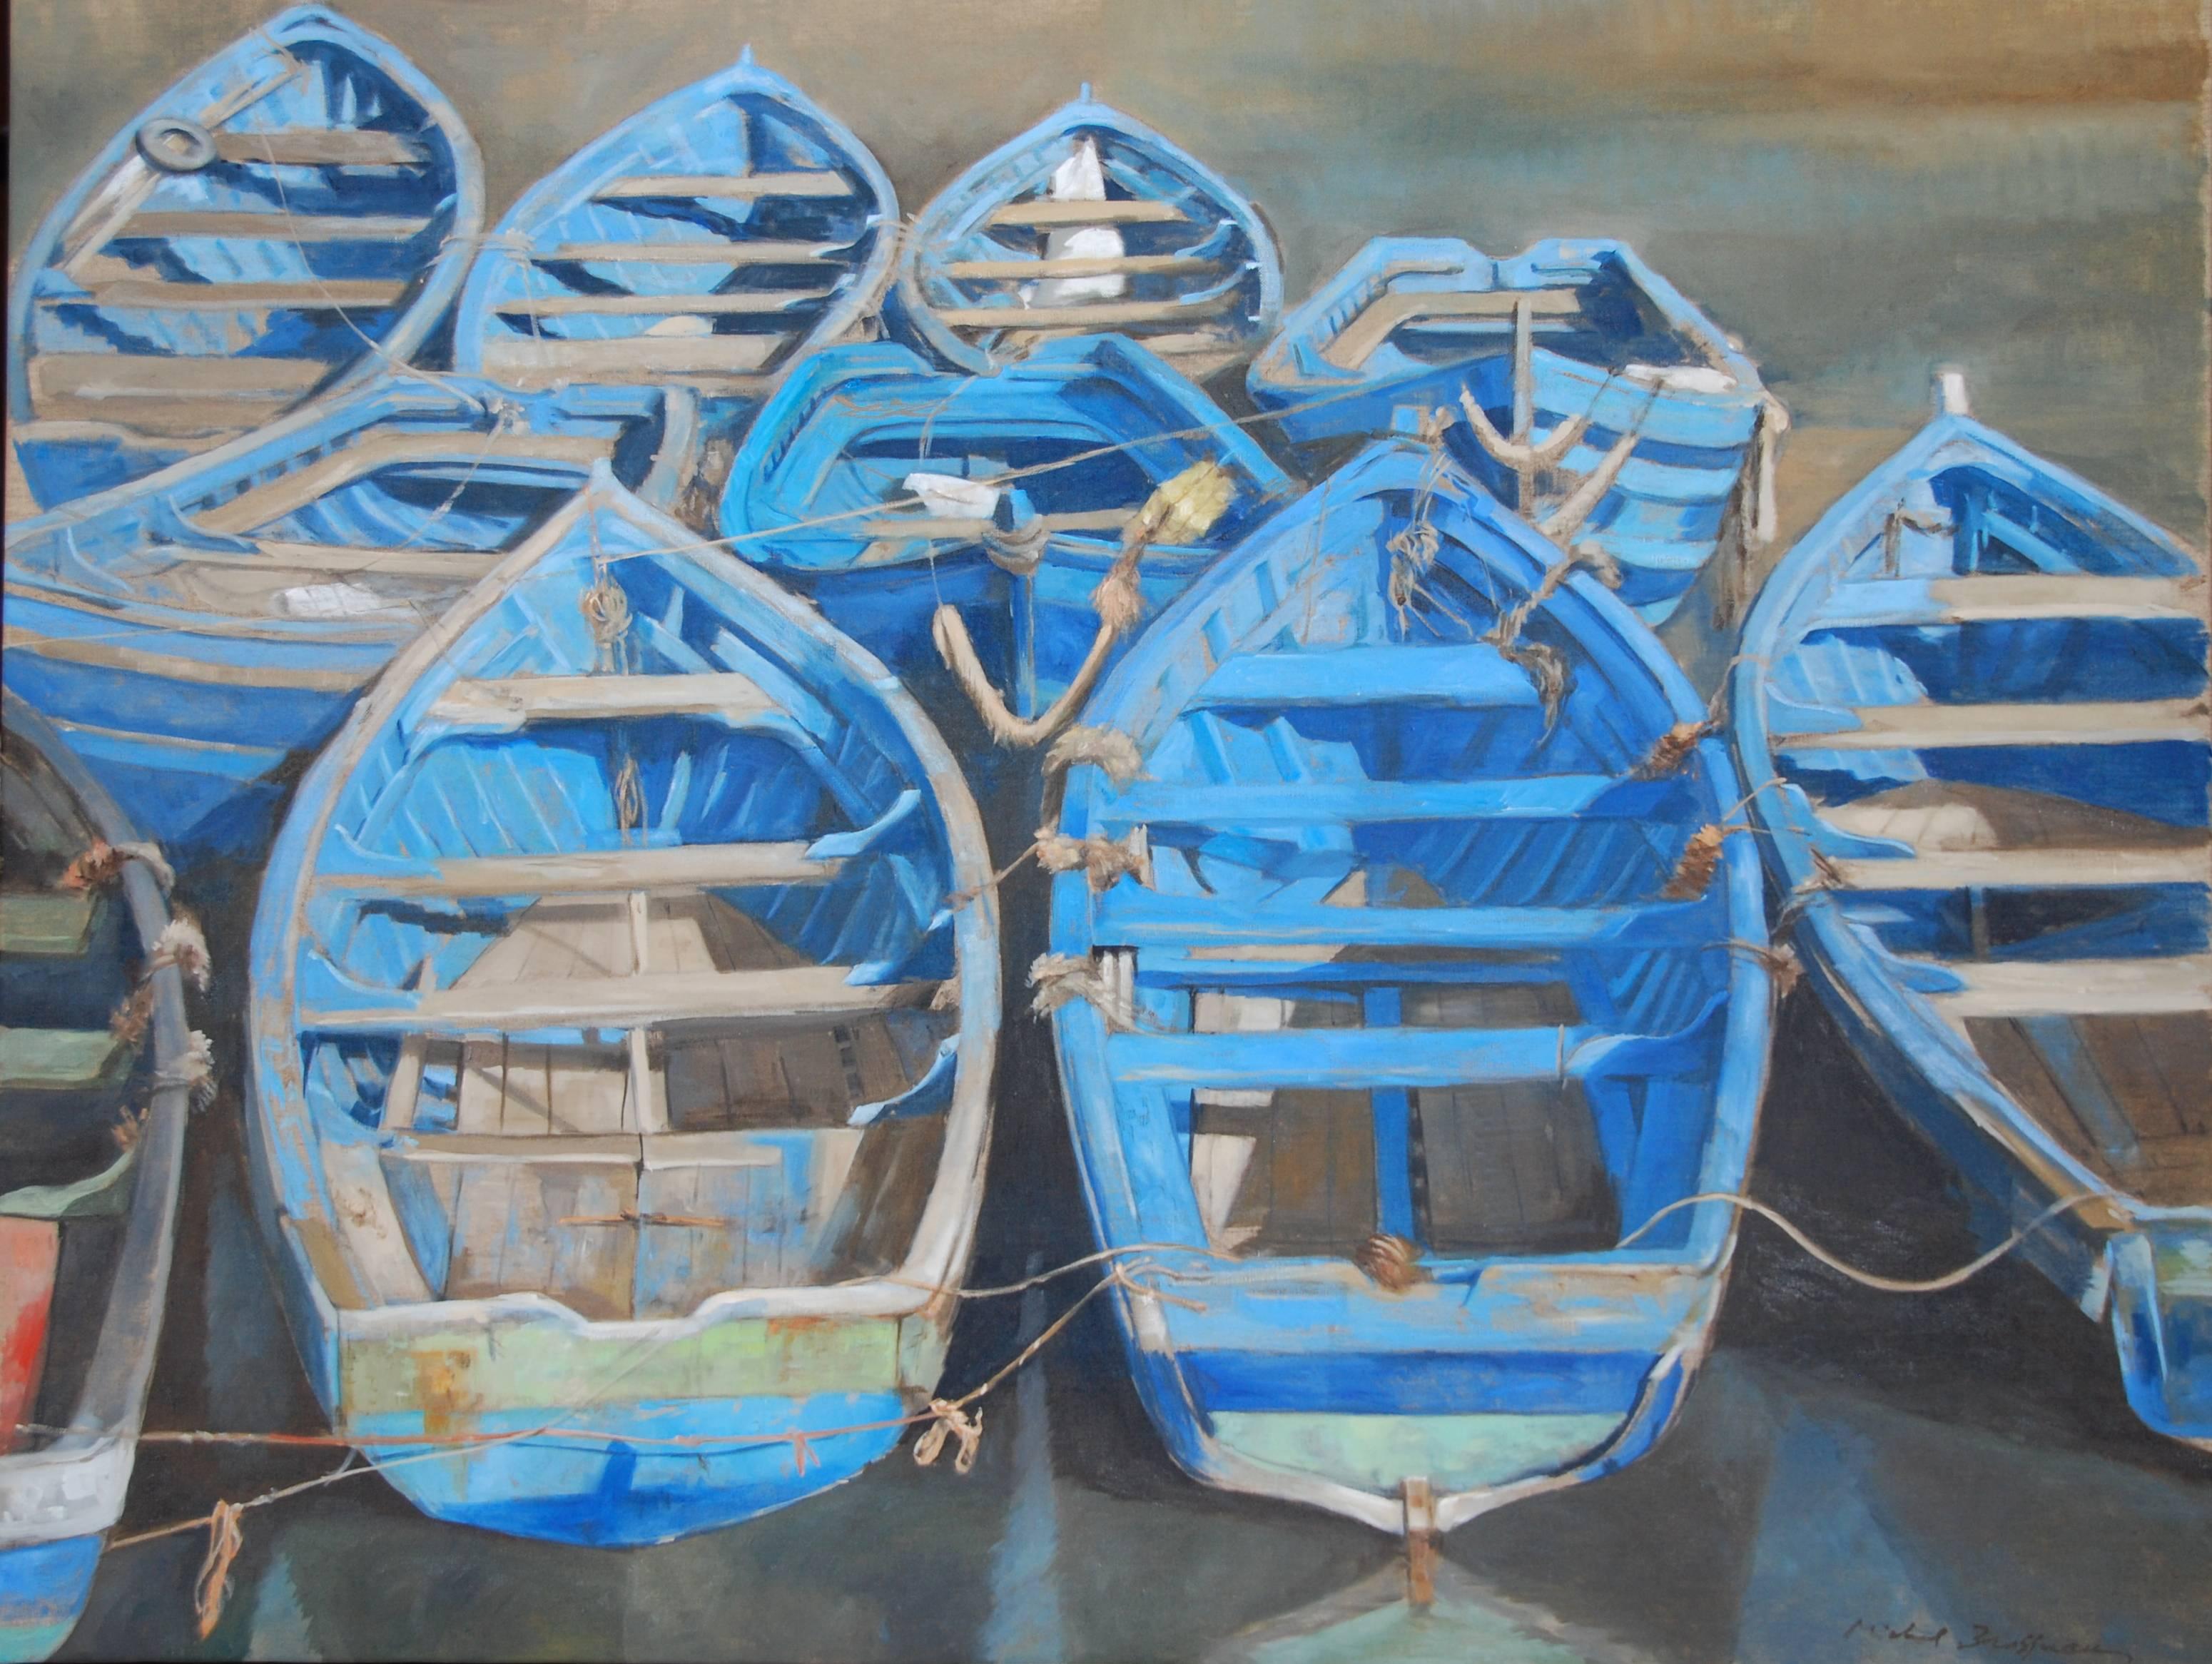 Michel Brosseau Still-Life Painting - "All Tied Up" Blue Wooden Rowboats Tied at Dock, Painted on Linen